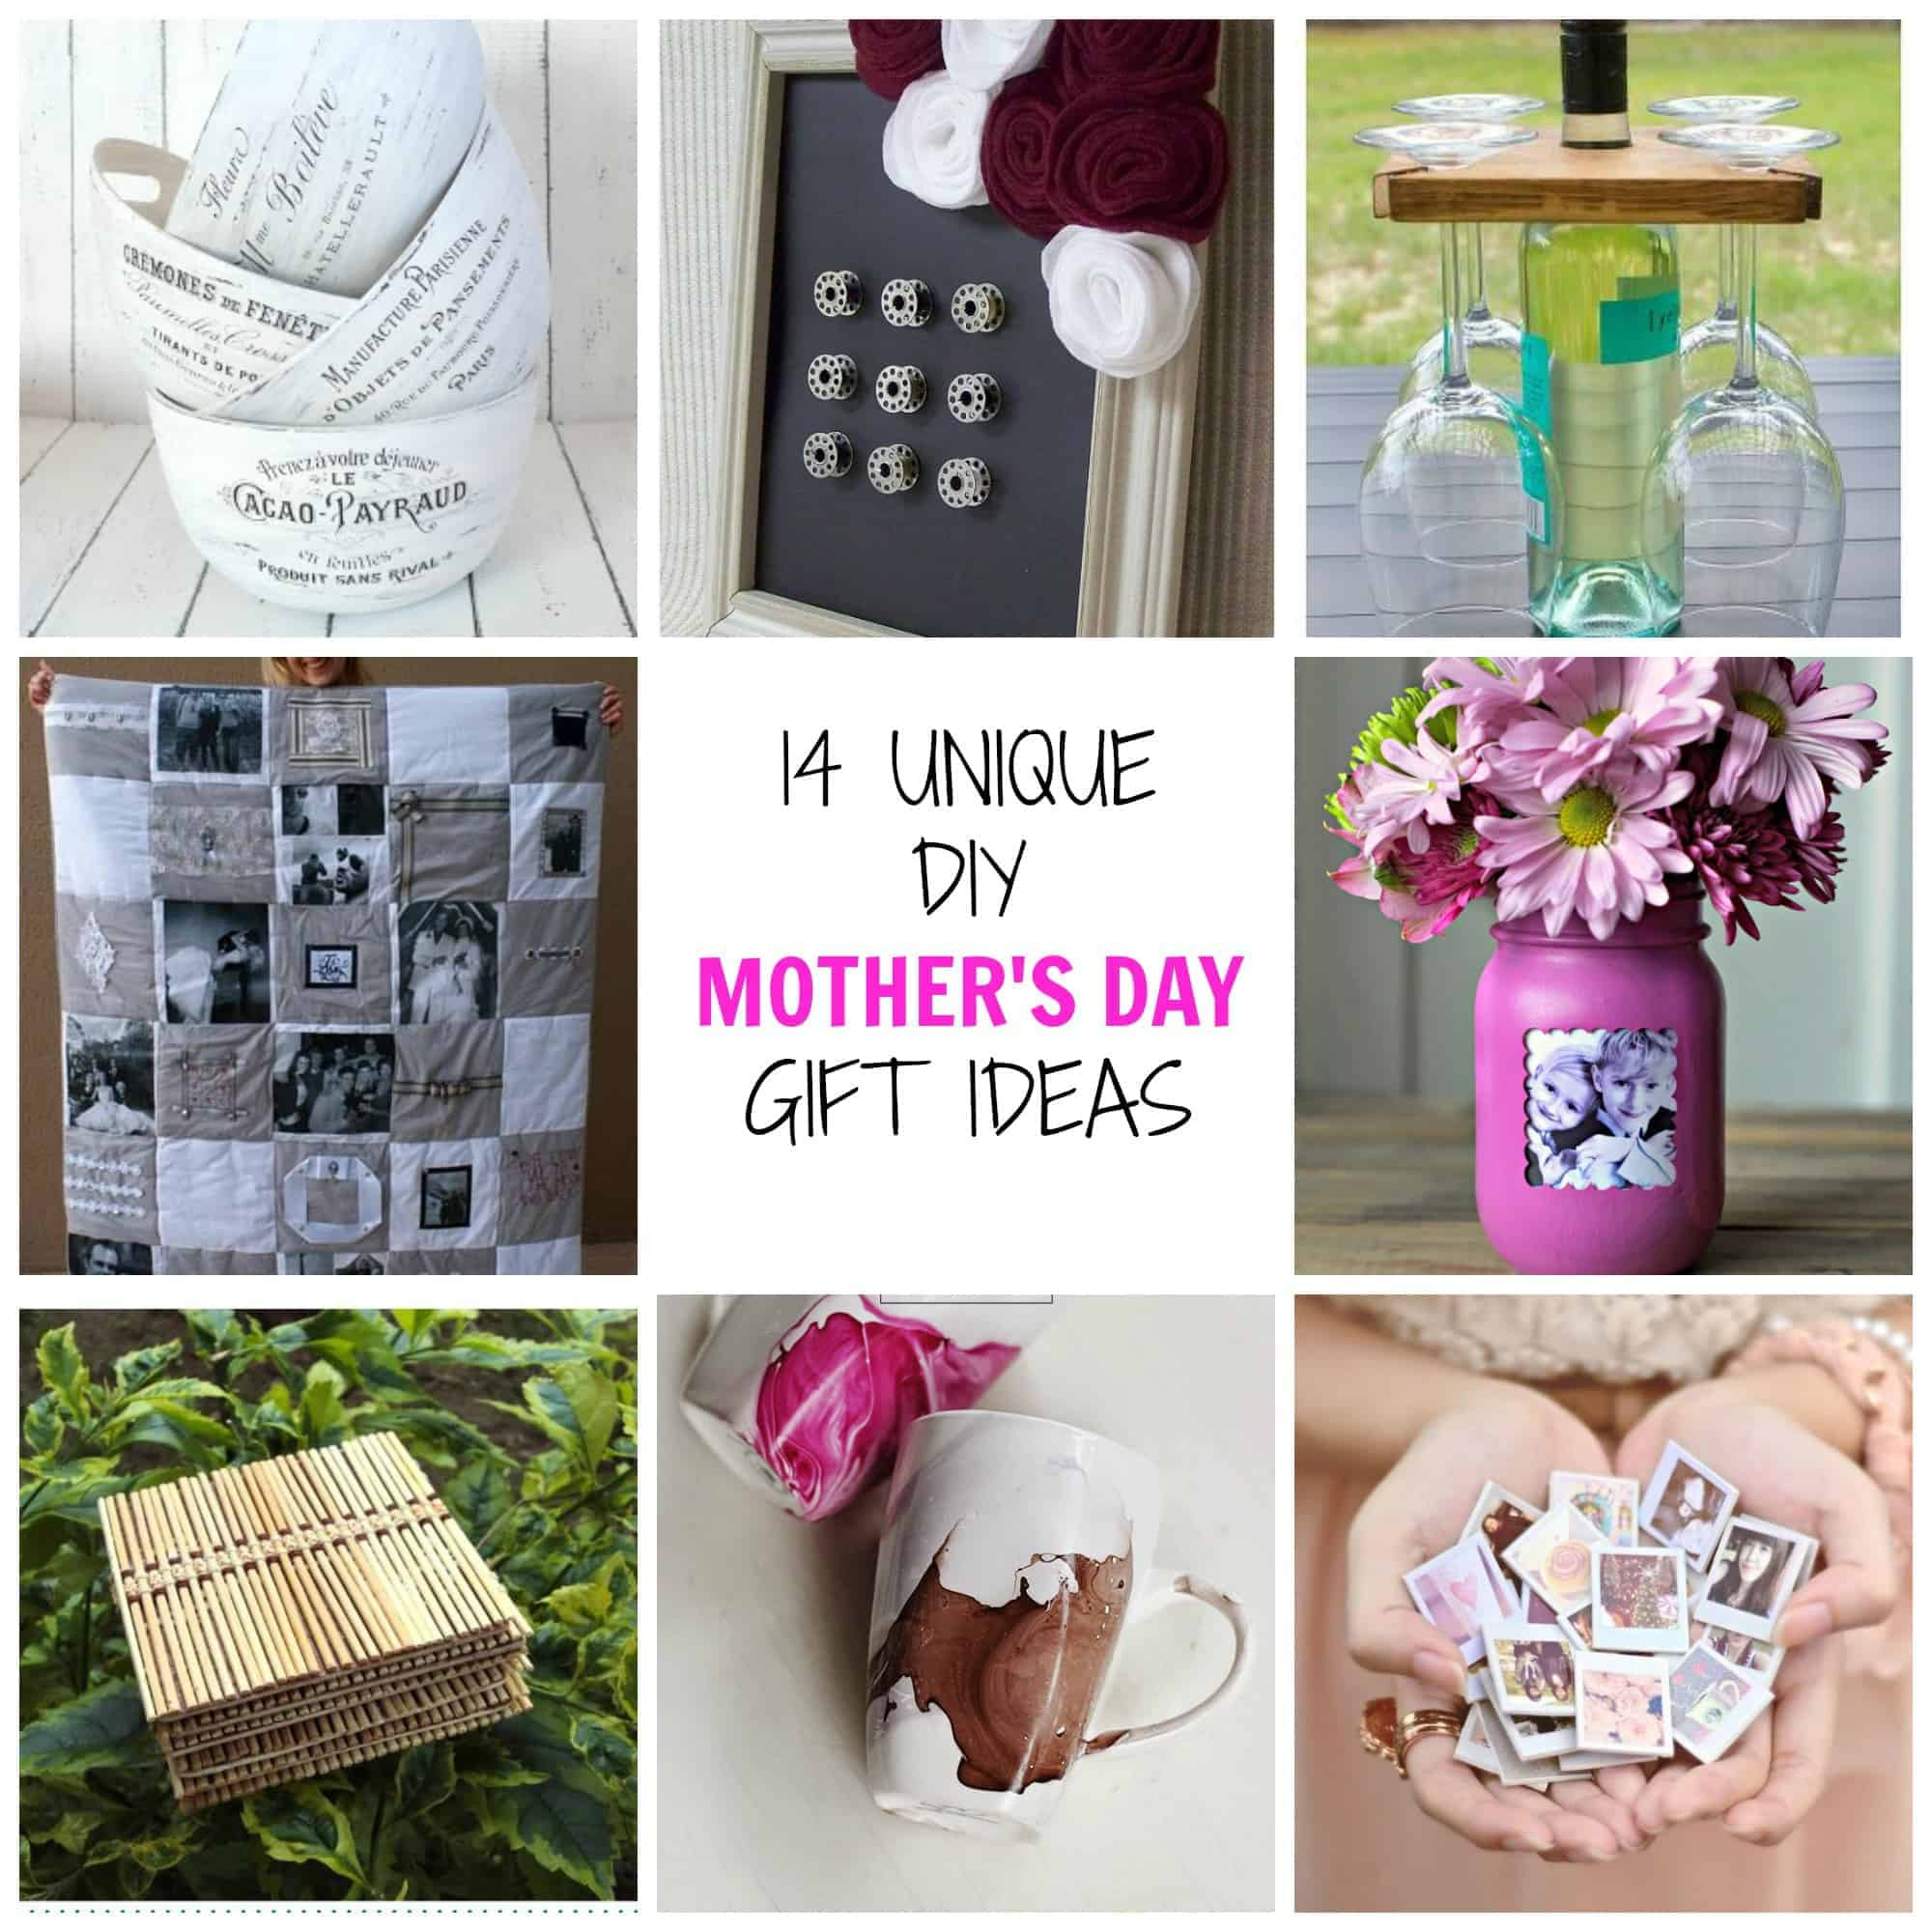 Easy DIY Mothers Day Gifts
 14 Unique DIY Mother s Day Gifts Simplify Create Inspire